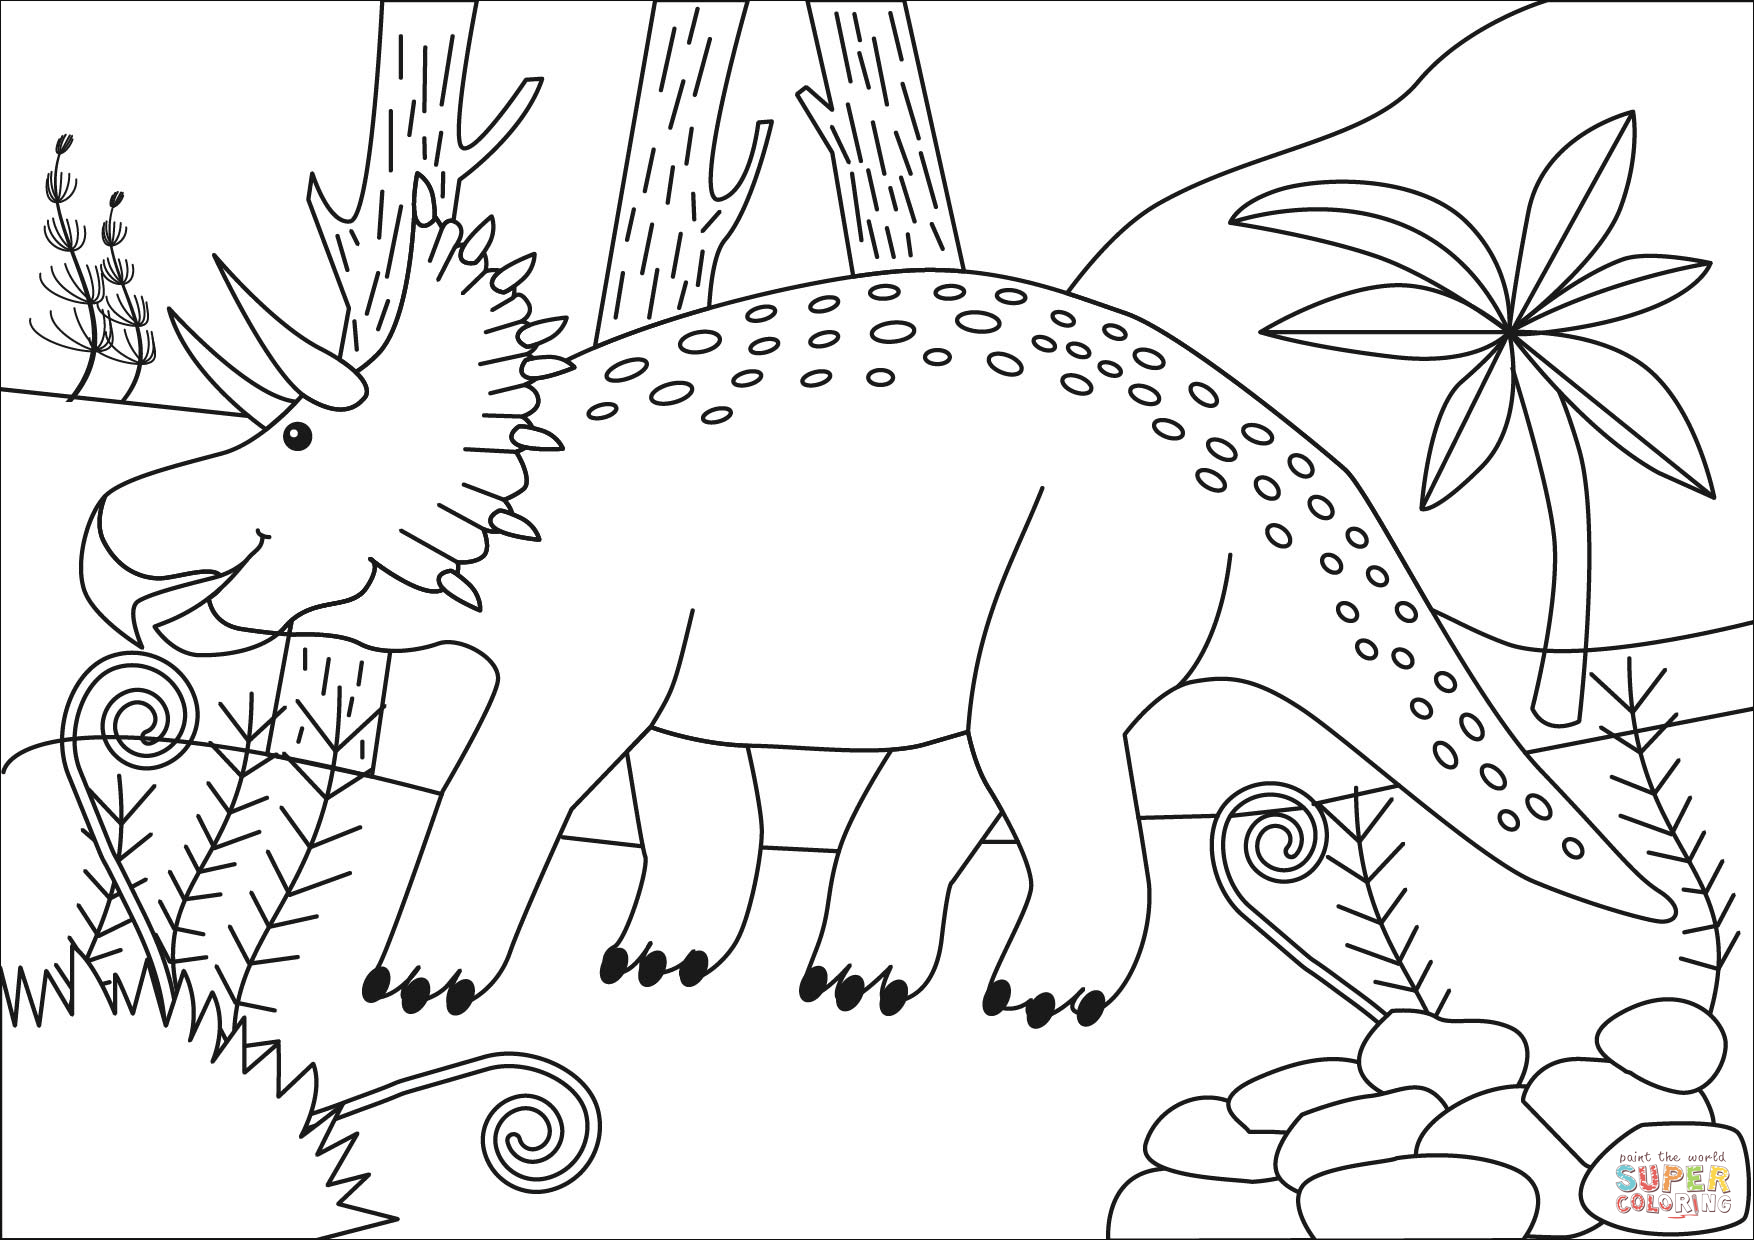 Triceratops cretaceous period dinosaur coloring page free printable coloring pages